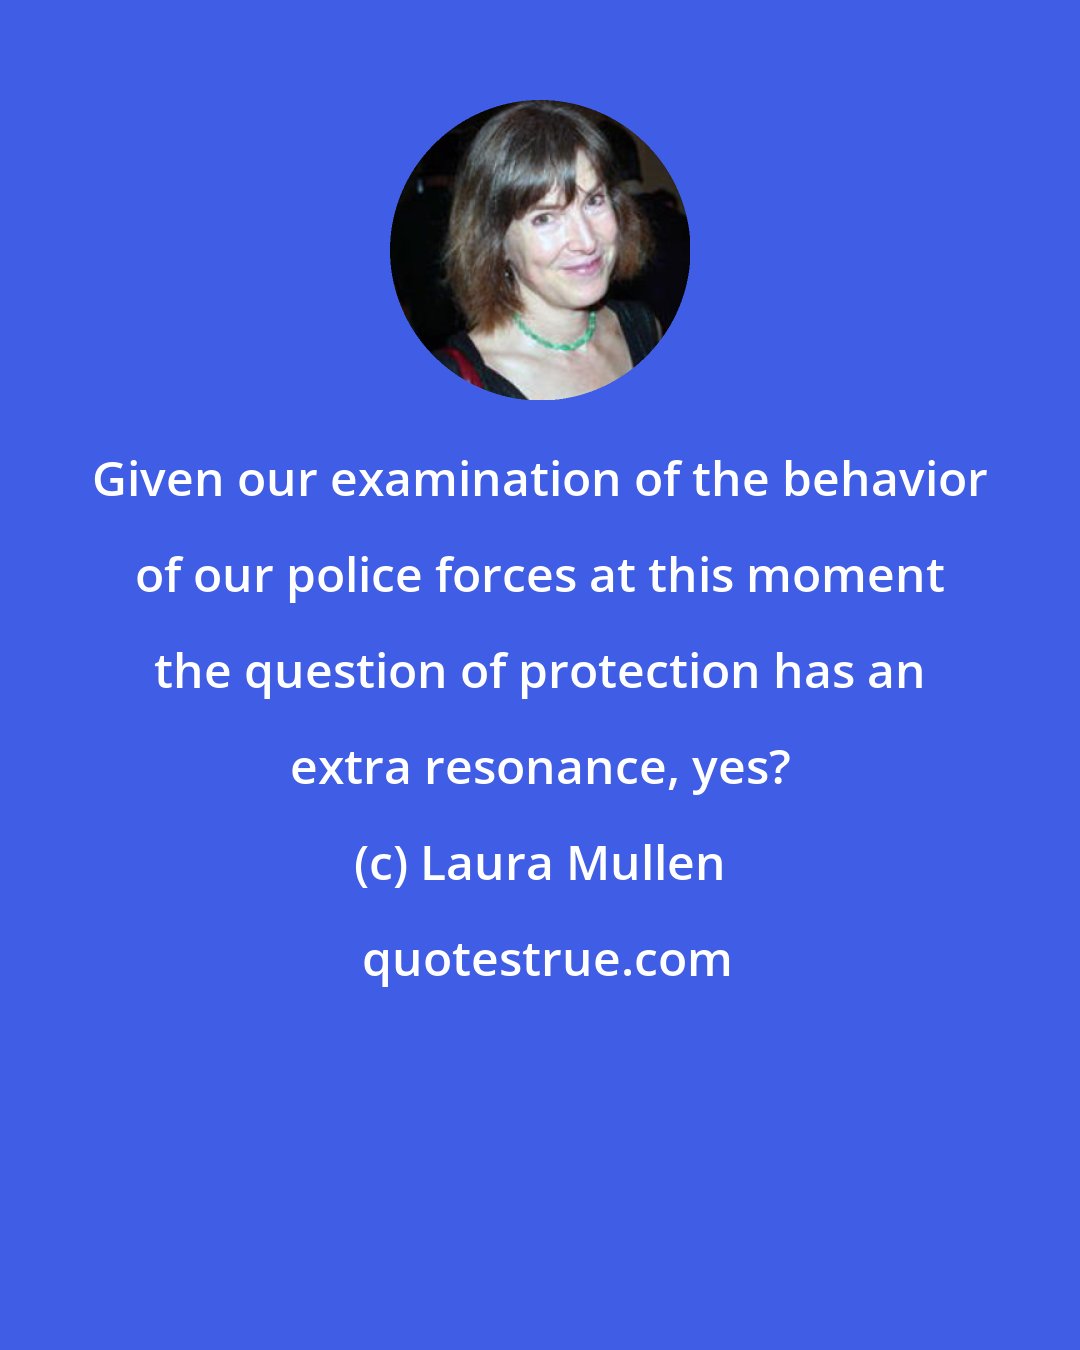 Laura Mullen: Given our examination of the behavior of our police forces at this moment the question of protection has an extra resonance, yes?